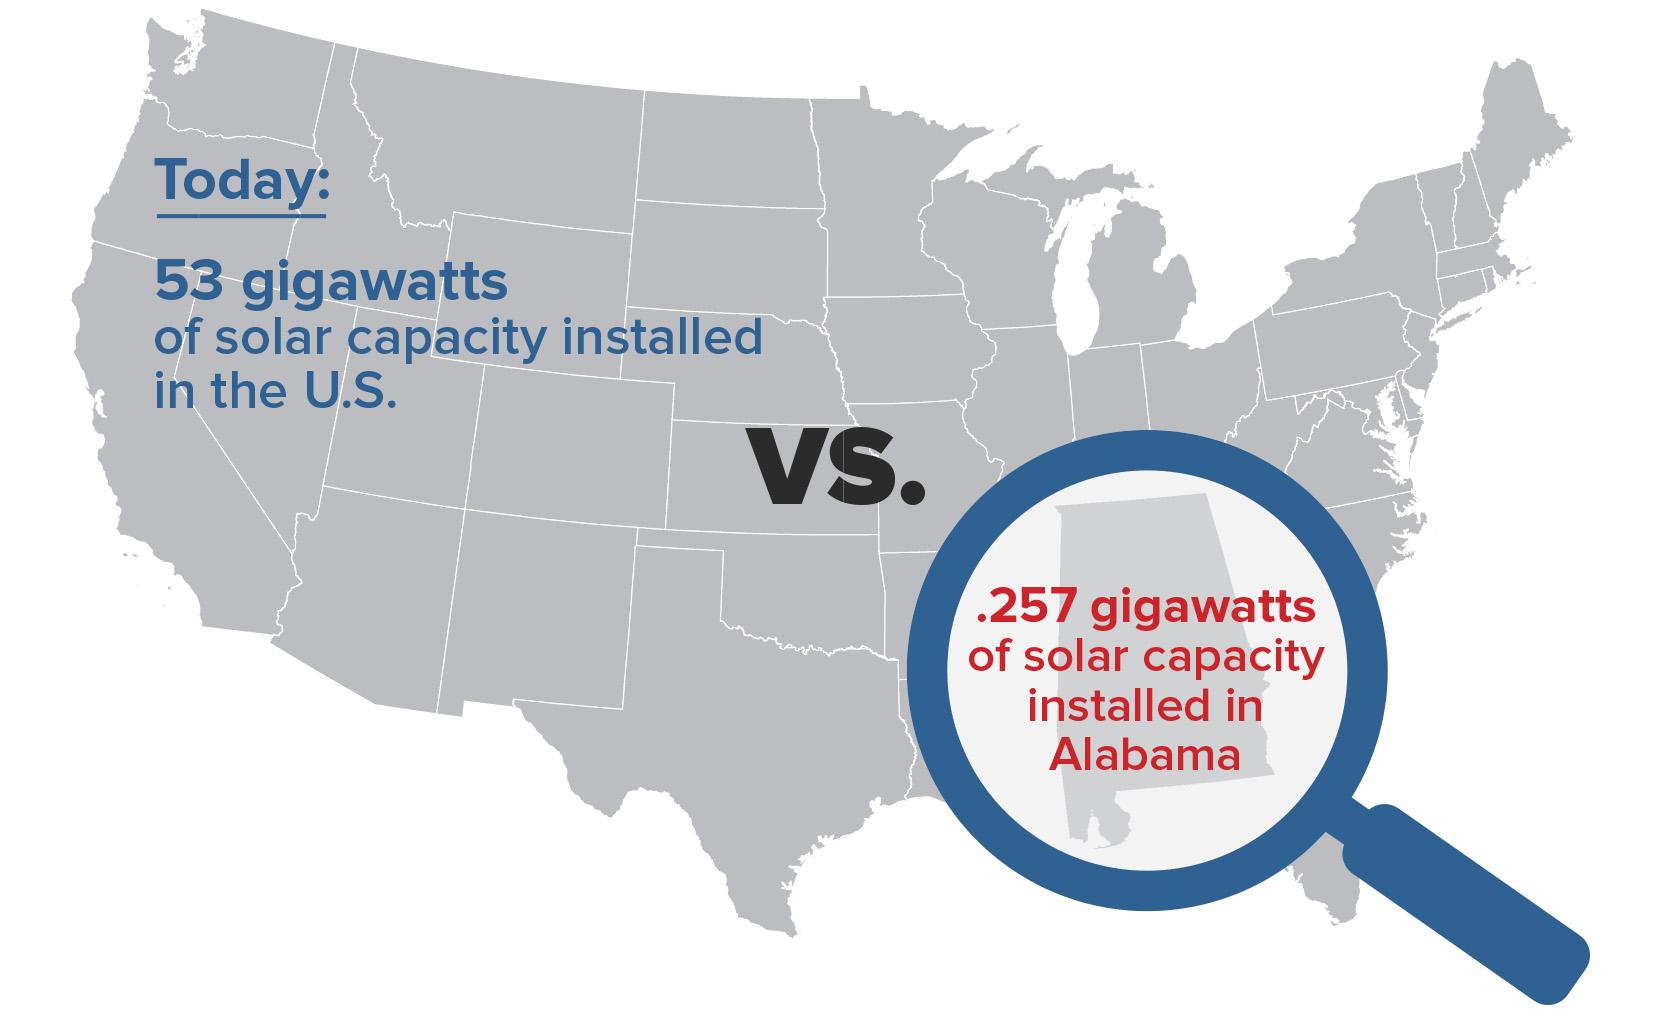 alabama-power-s-charge-on-solar-5-years-of-stunting-solar-growth